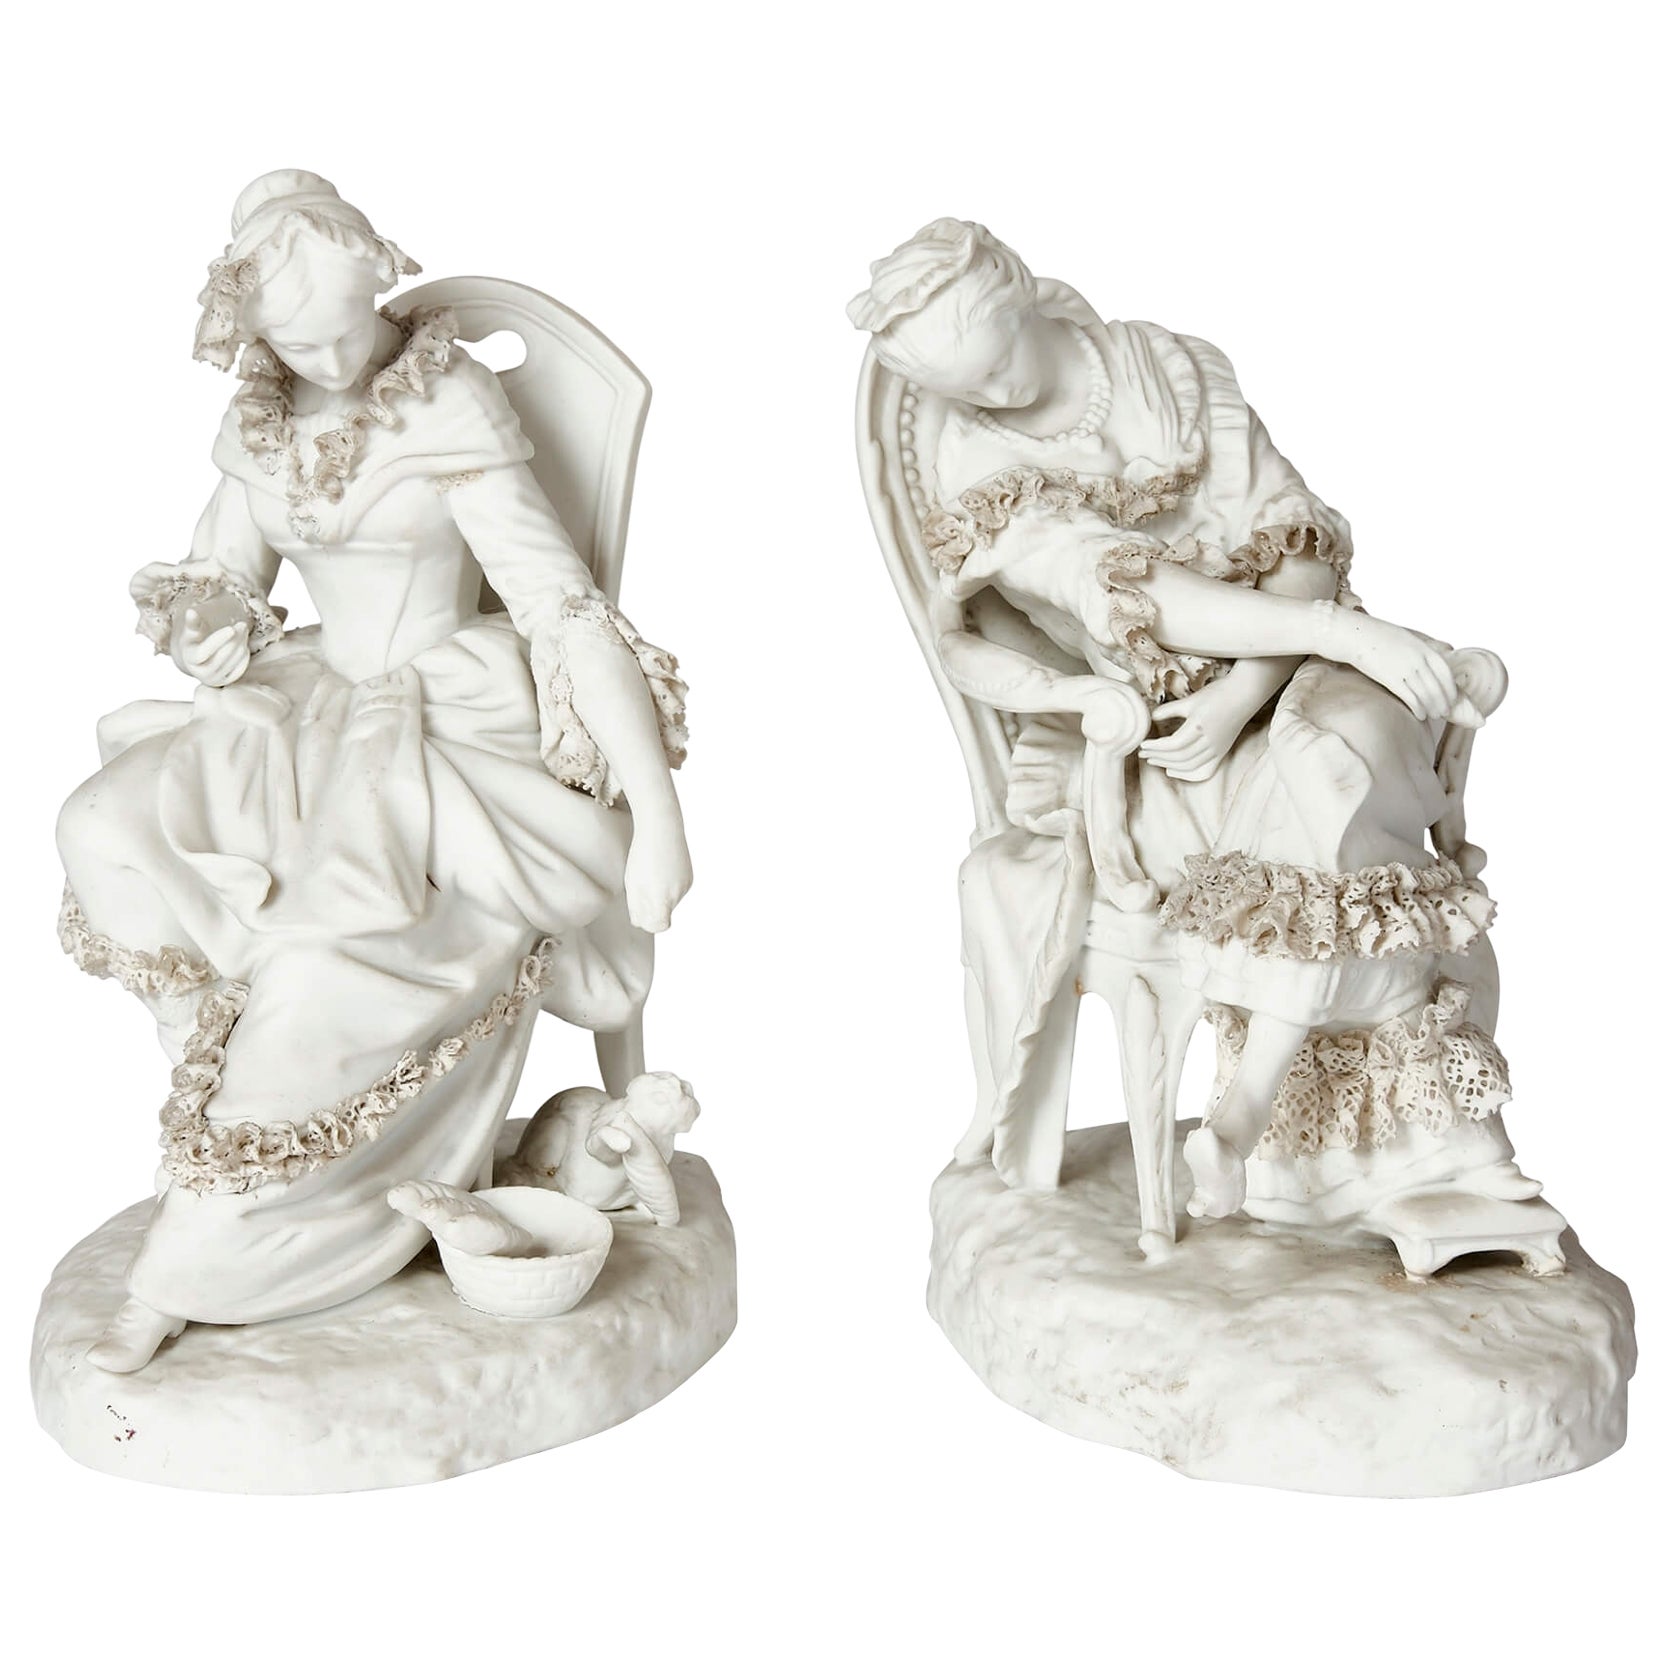 Pair of Rococo Style Bisque Porcelain Female Figures